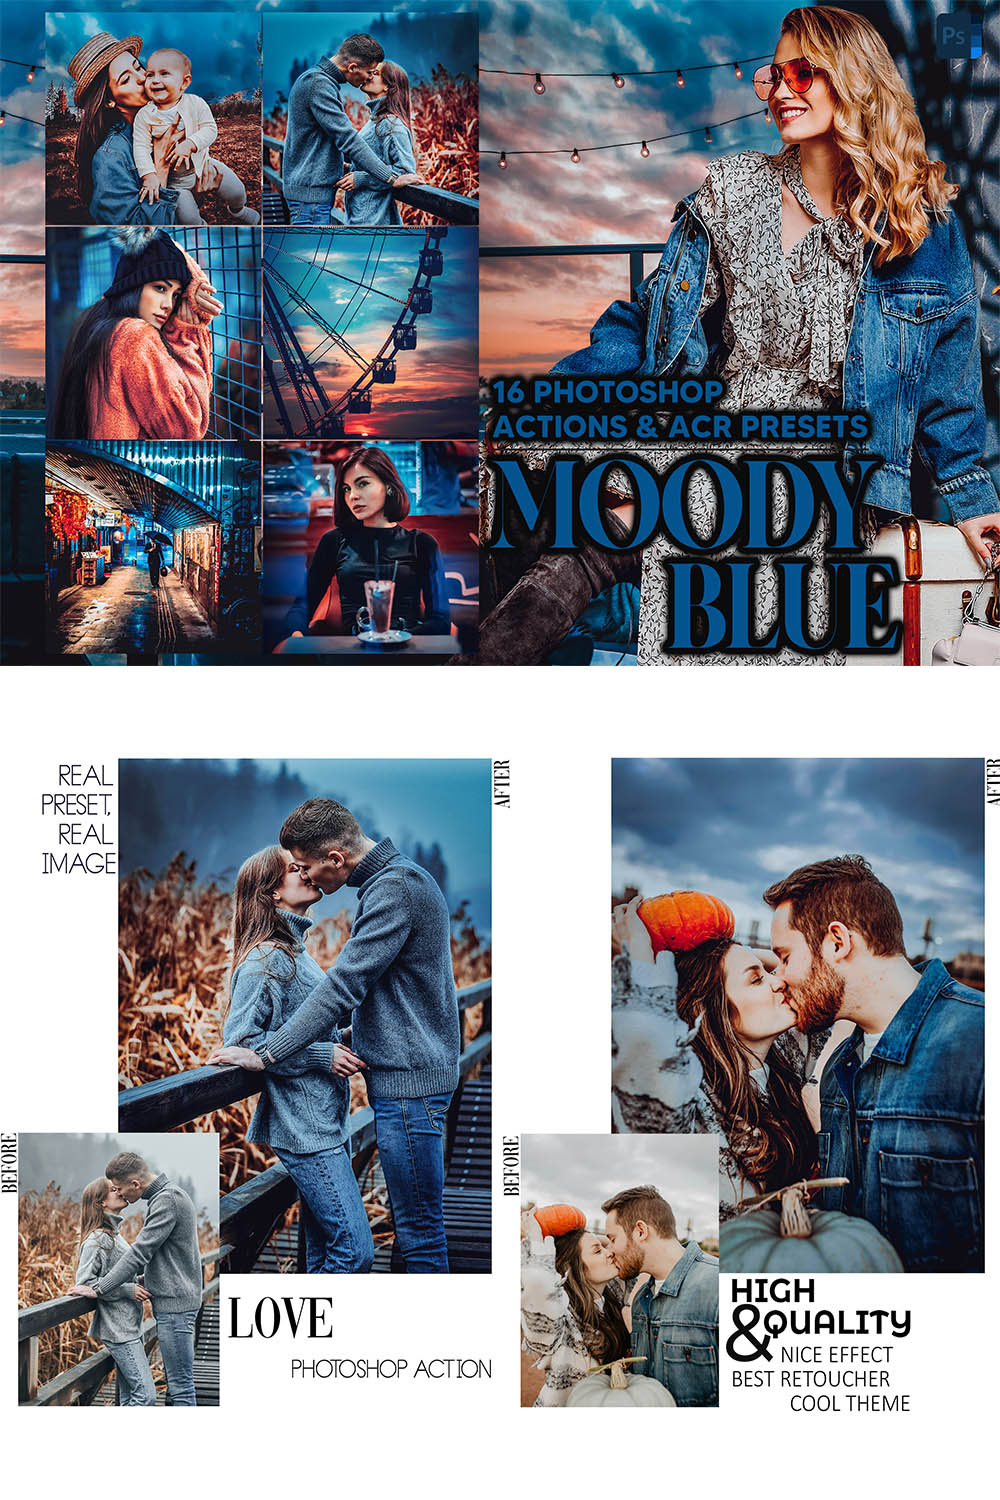 16 Photoshop Actions, Moody Blue Ps Action, Dark Clean ACR Preset, Tint Deep Ps Filter, Atn Portrait And Lifestyle Theme Instagram, Blogger pinterest preview image.